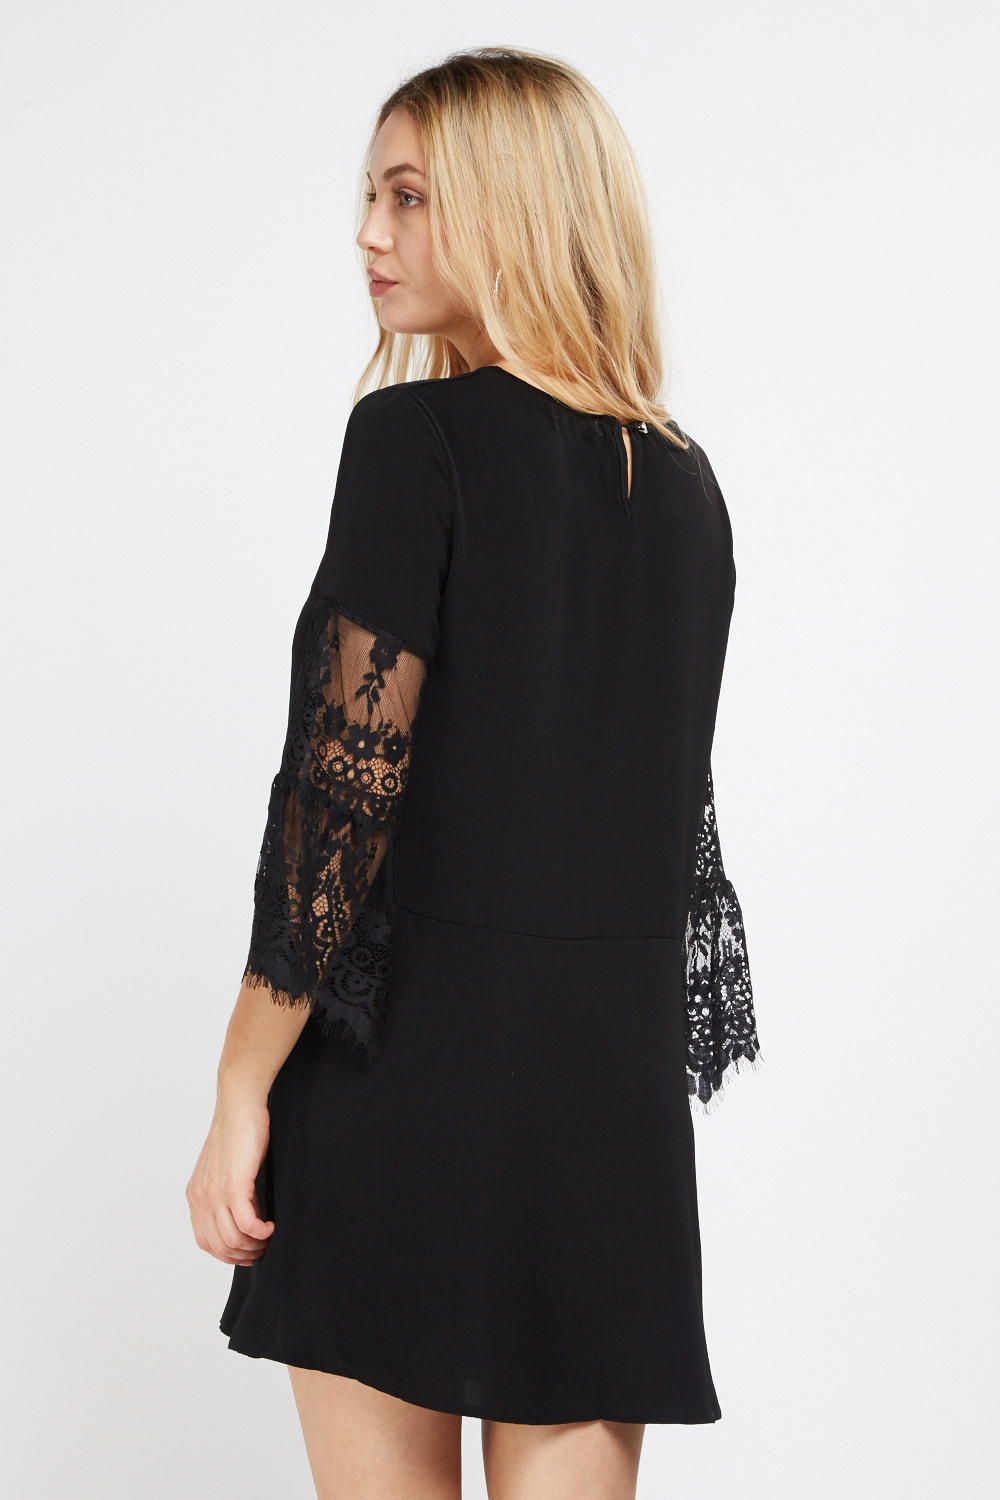 Frilly Lace Sleeve Swing Dress - Just $6